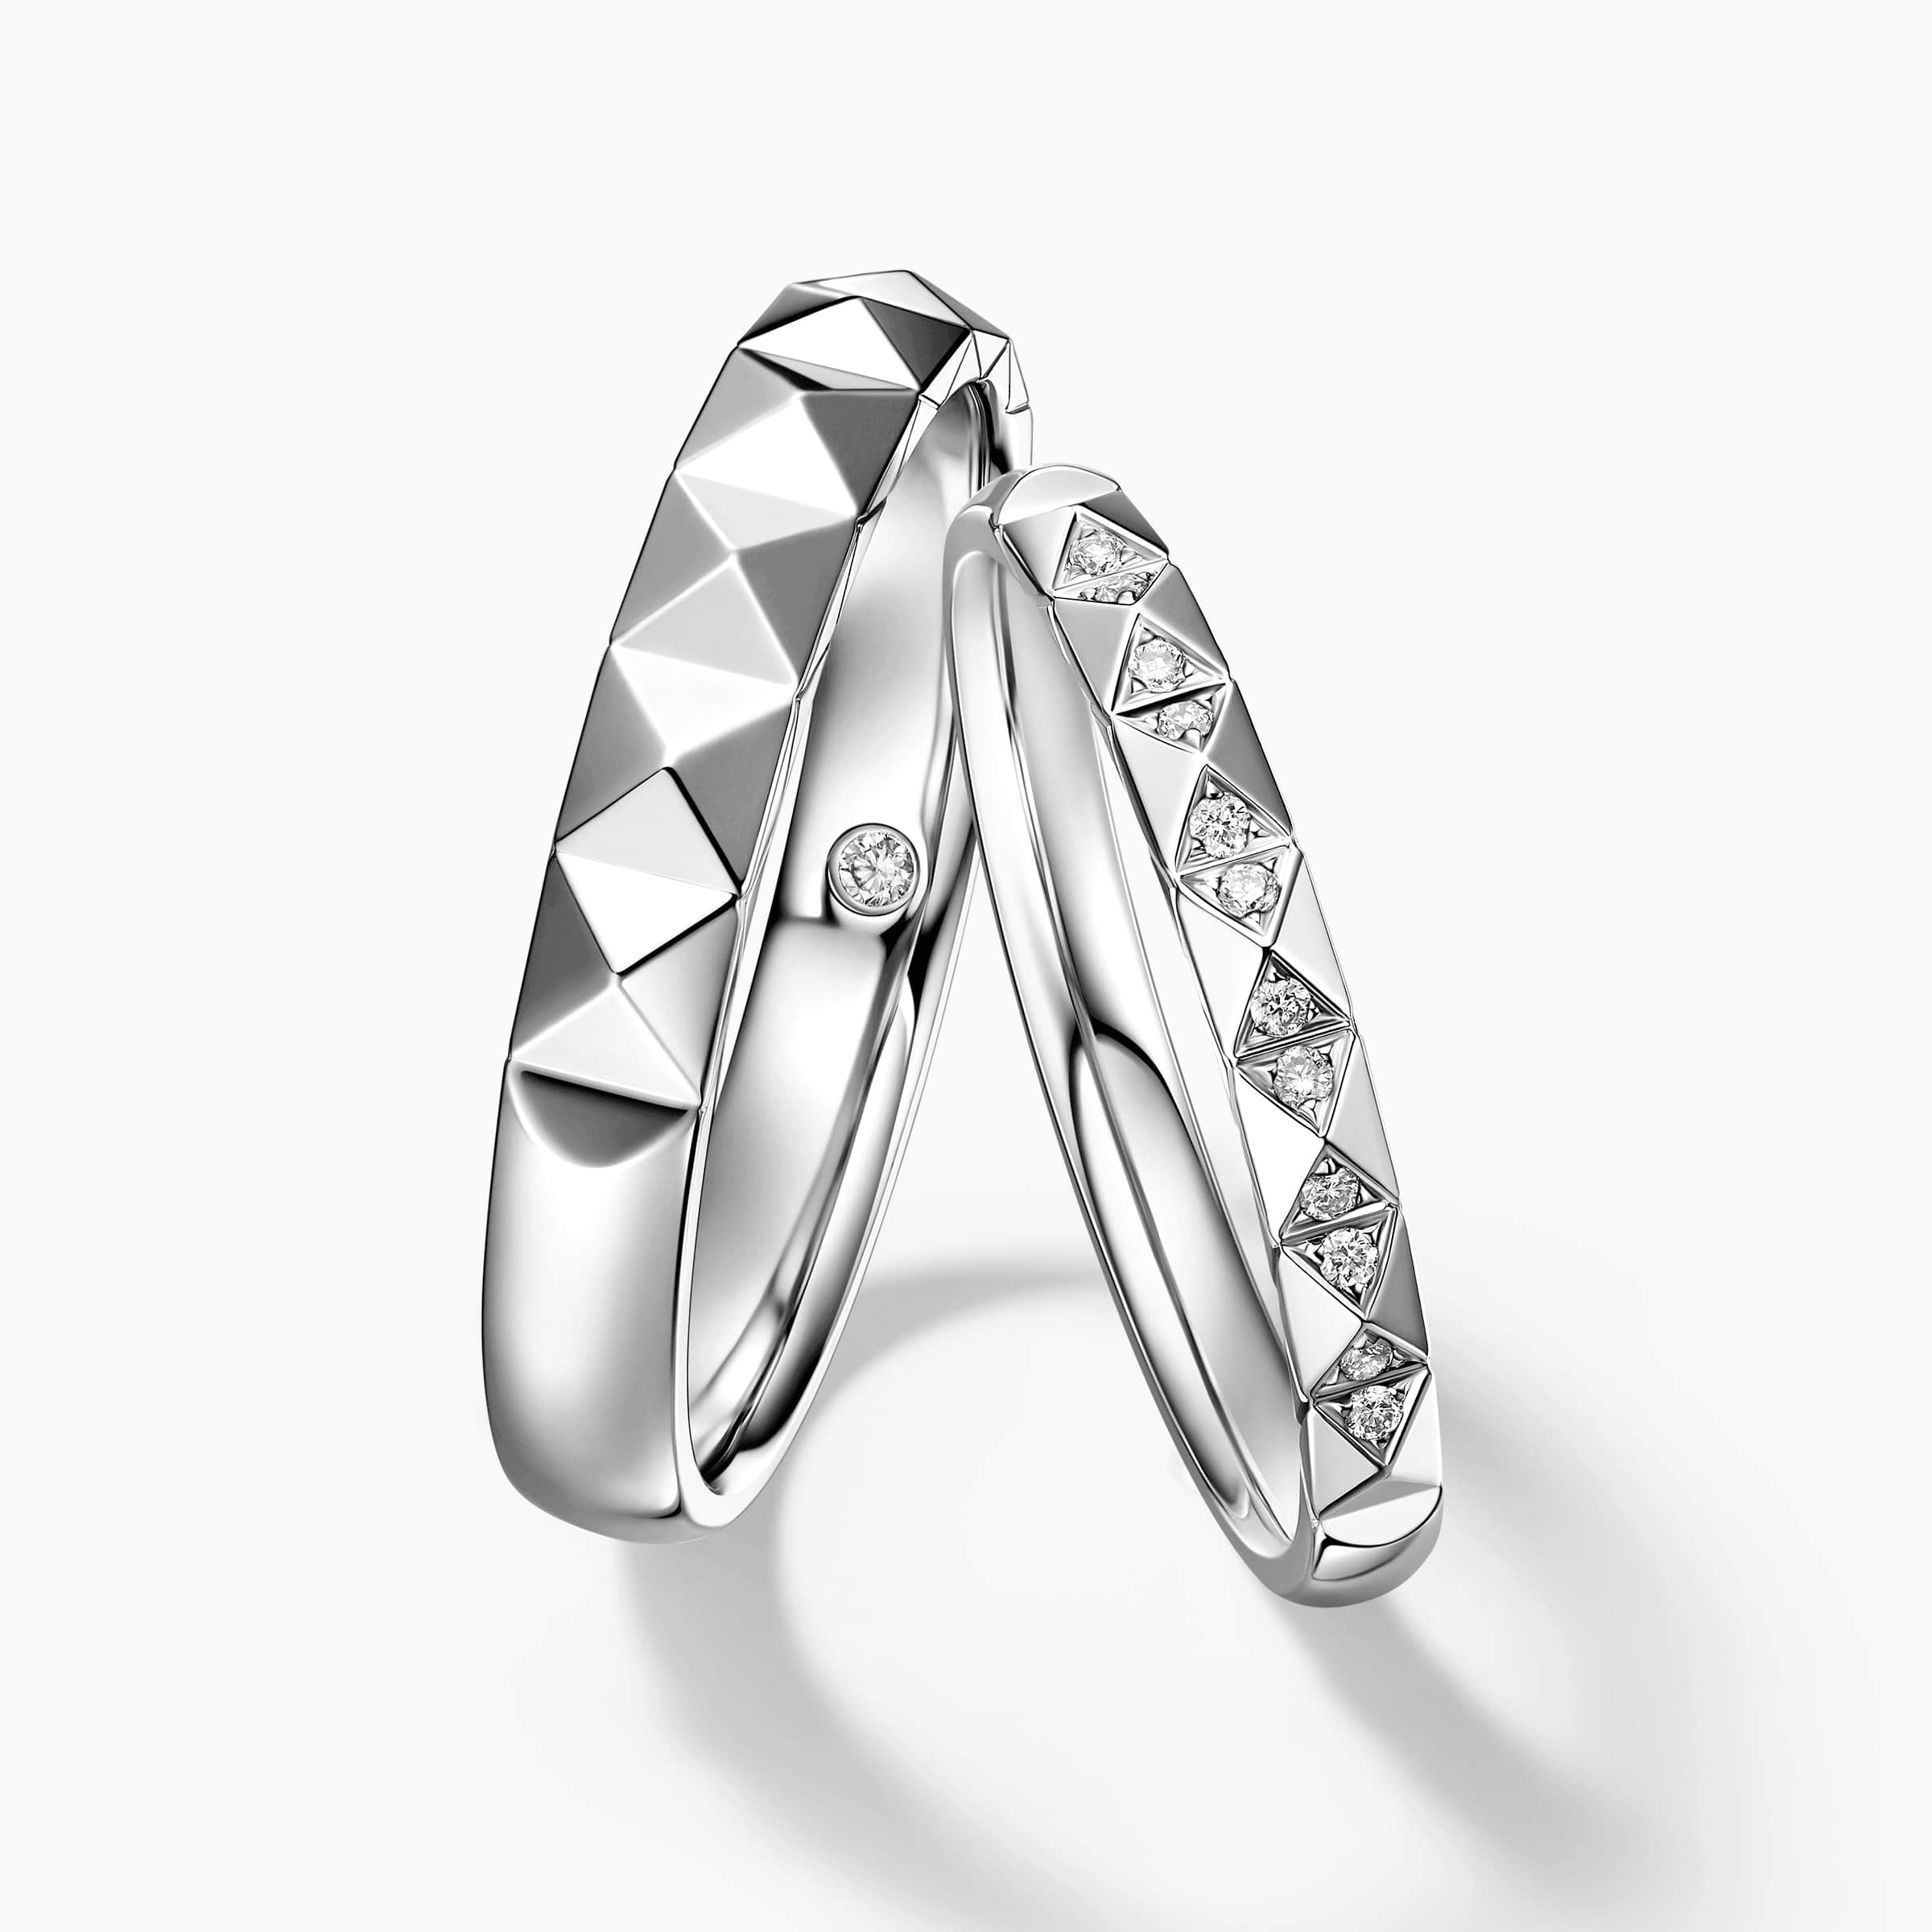 8 Contemporary Wedding Rings For Him or Her